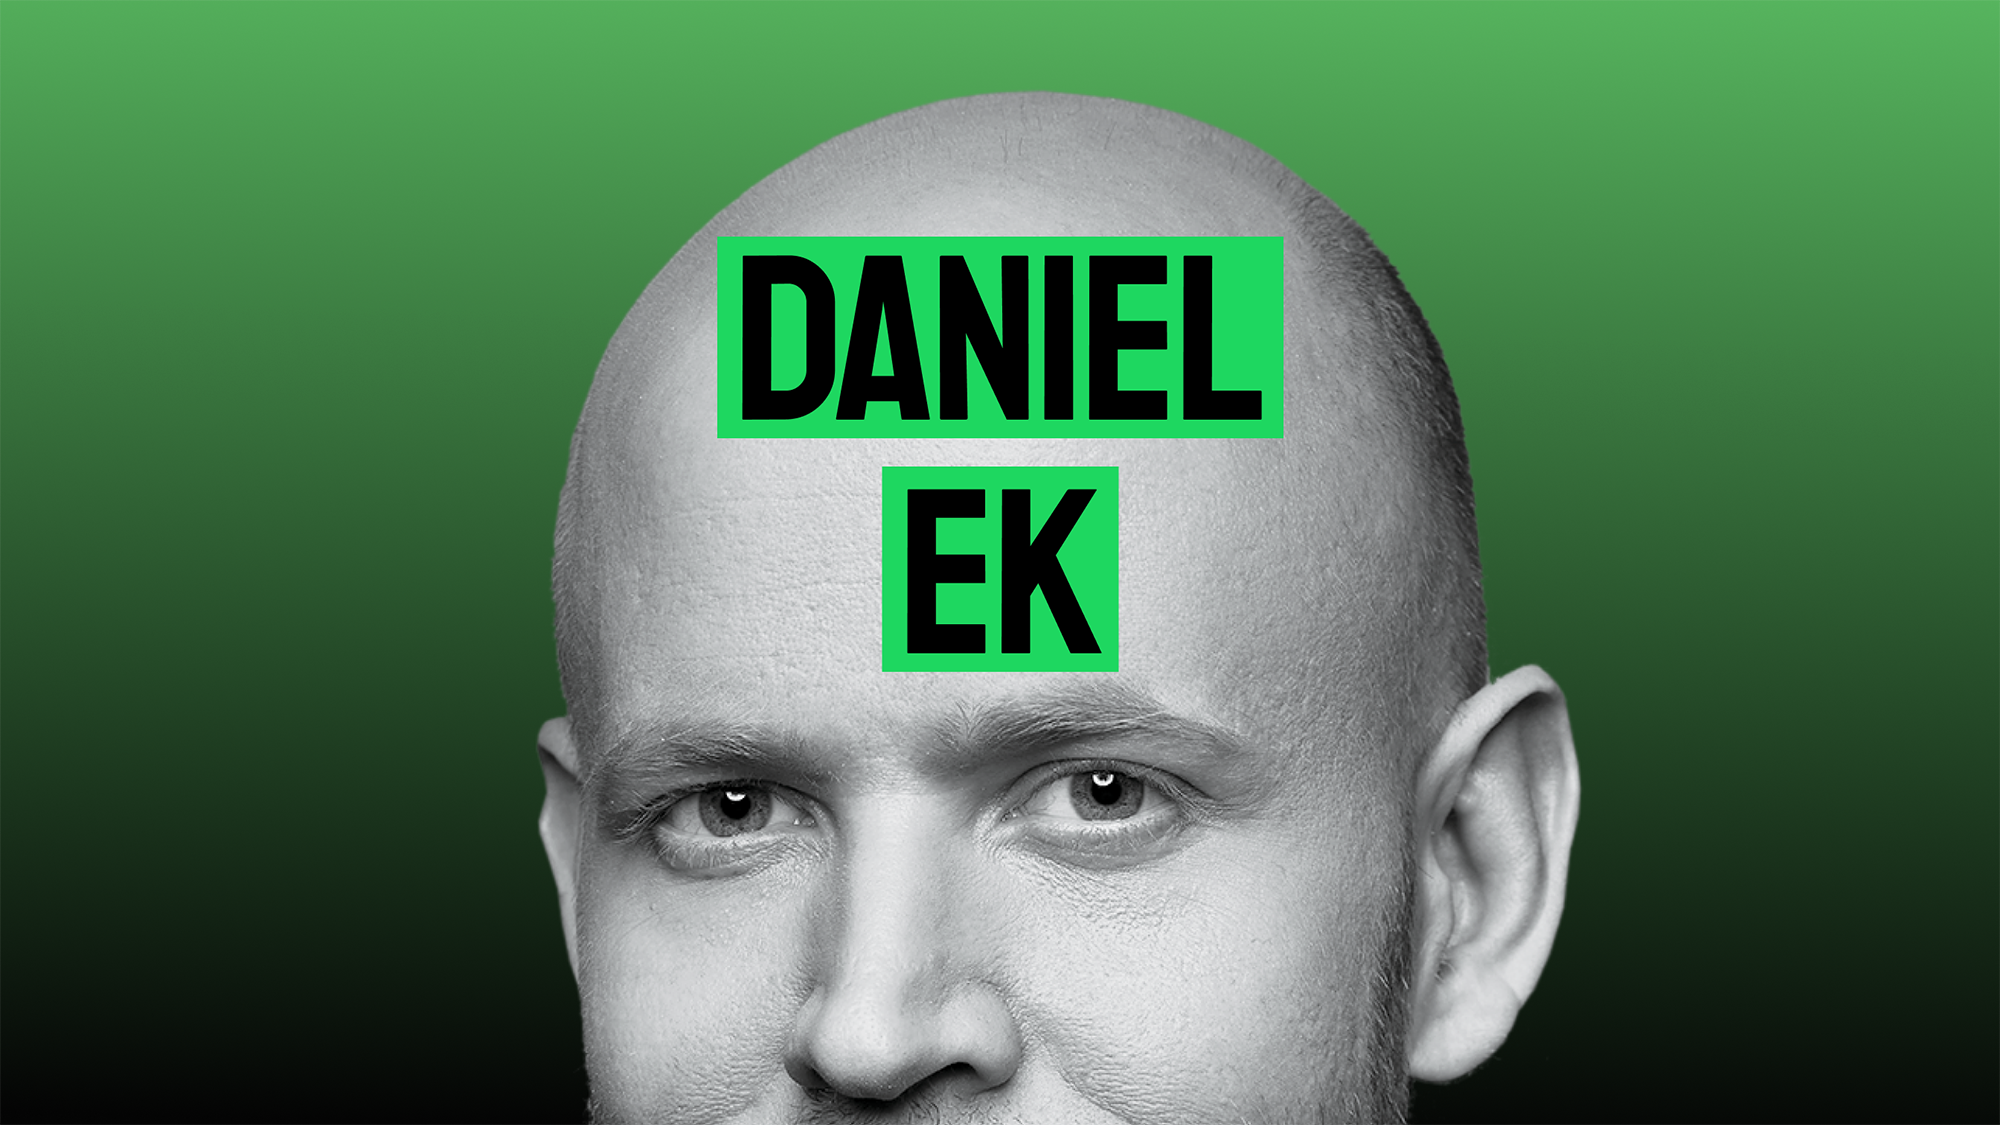 Daniel Ek: The founder who disrupted the music industry with Spotify